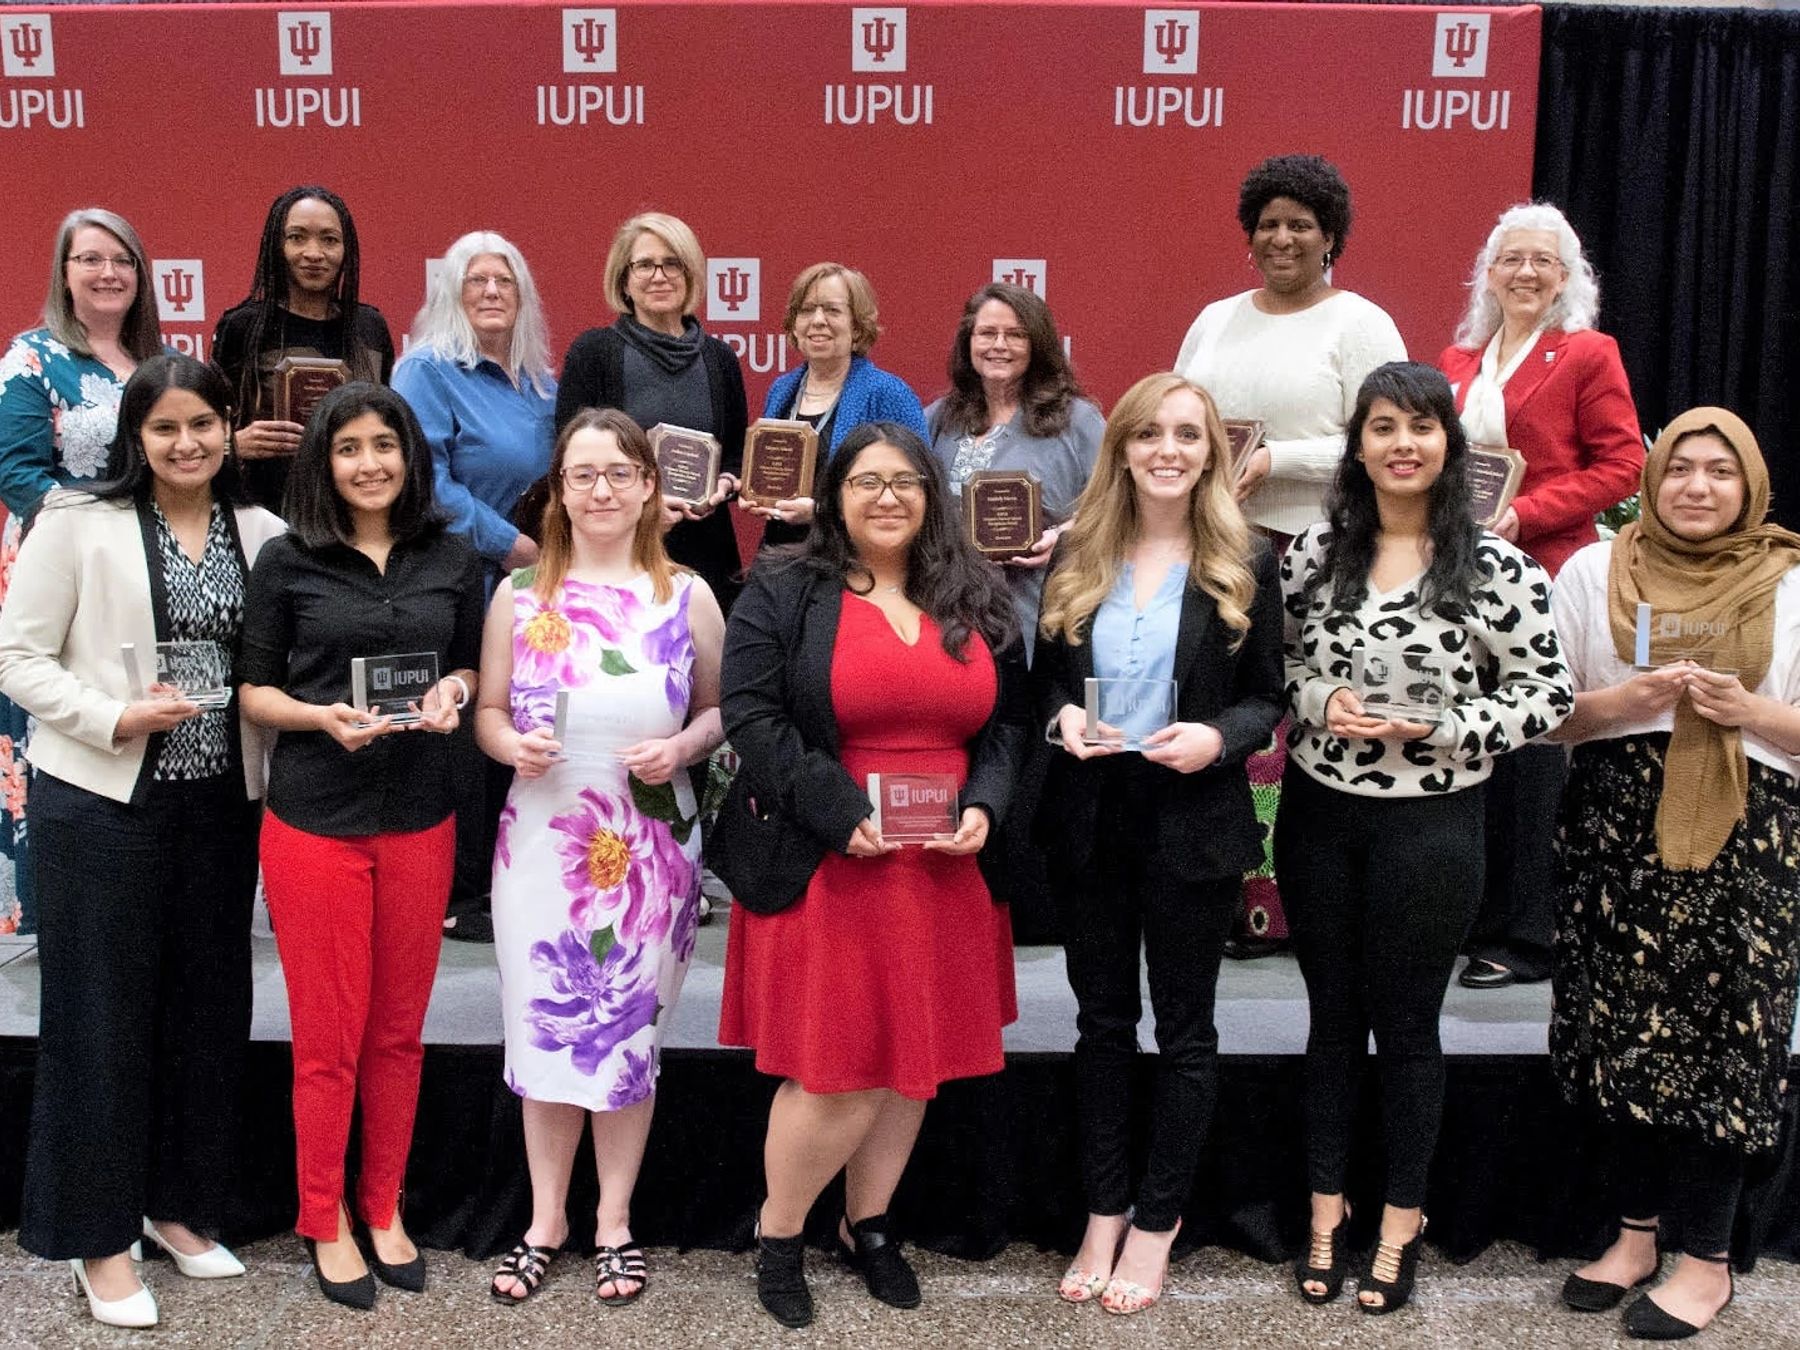 Women stand in front of an IUPUI backdrop holding awards